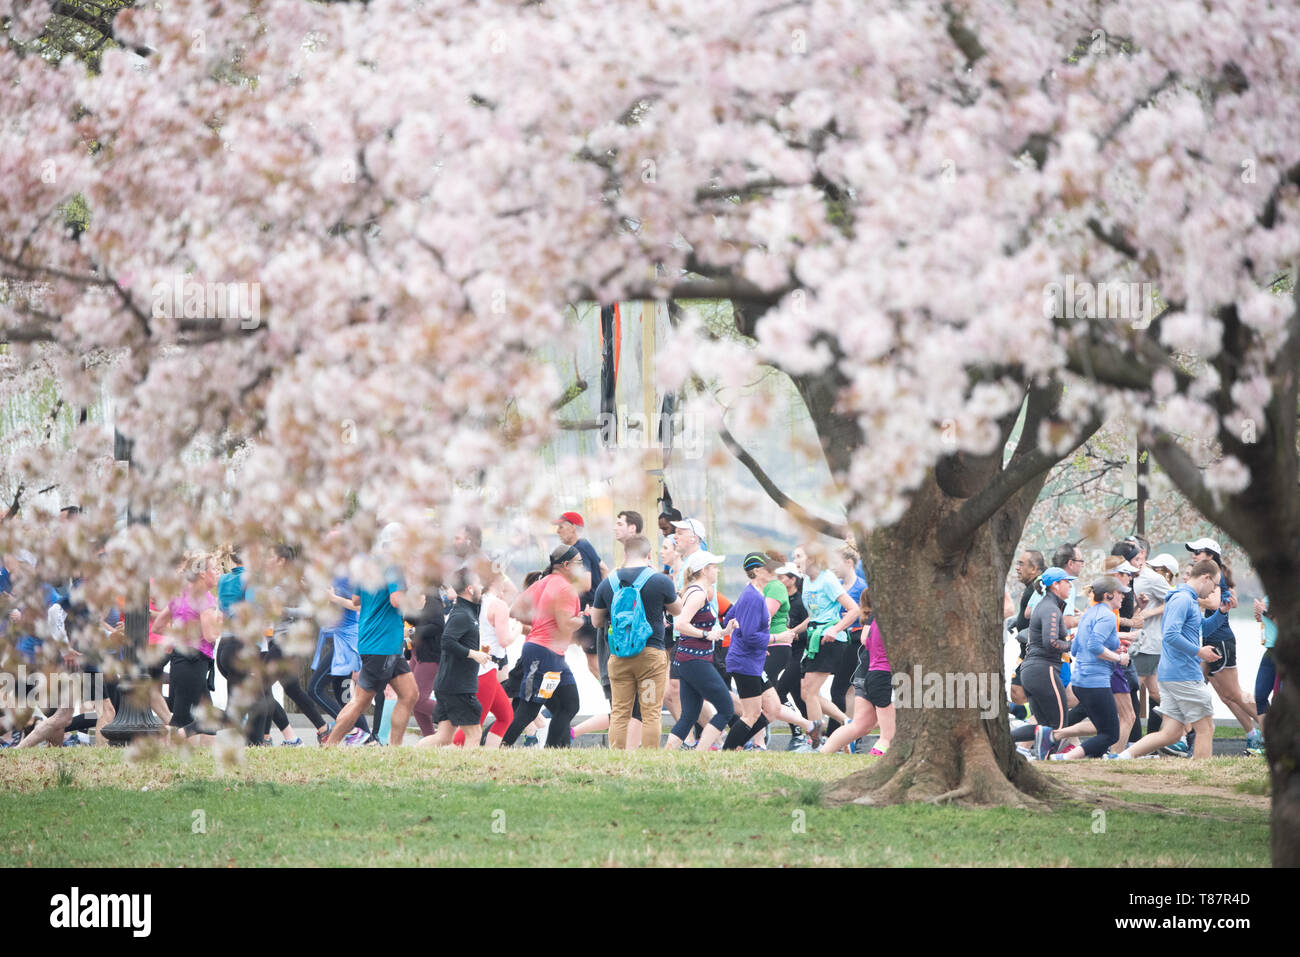 WASHINGTON, DC - Runners in the Cherry Blossom 10 Mile Race run past Washington DC's famous cherry blossoms in full bloom. Each spring, the blooming of thousands of Japanese cherry blossoms around Washington DC's Tidal Basin and National Mall bring throngs of tourists to the city. Stock Photo